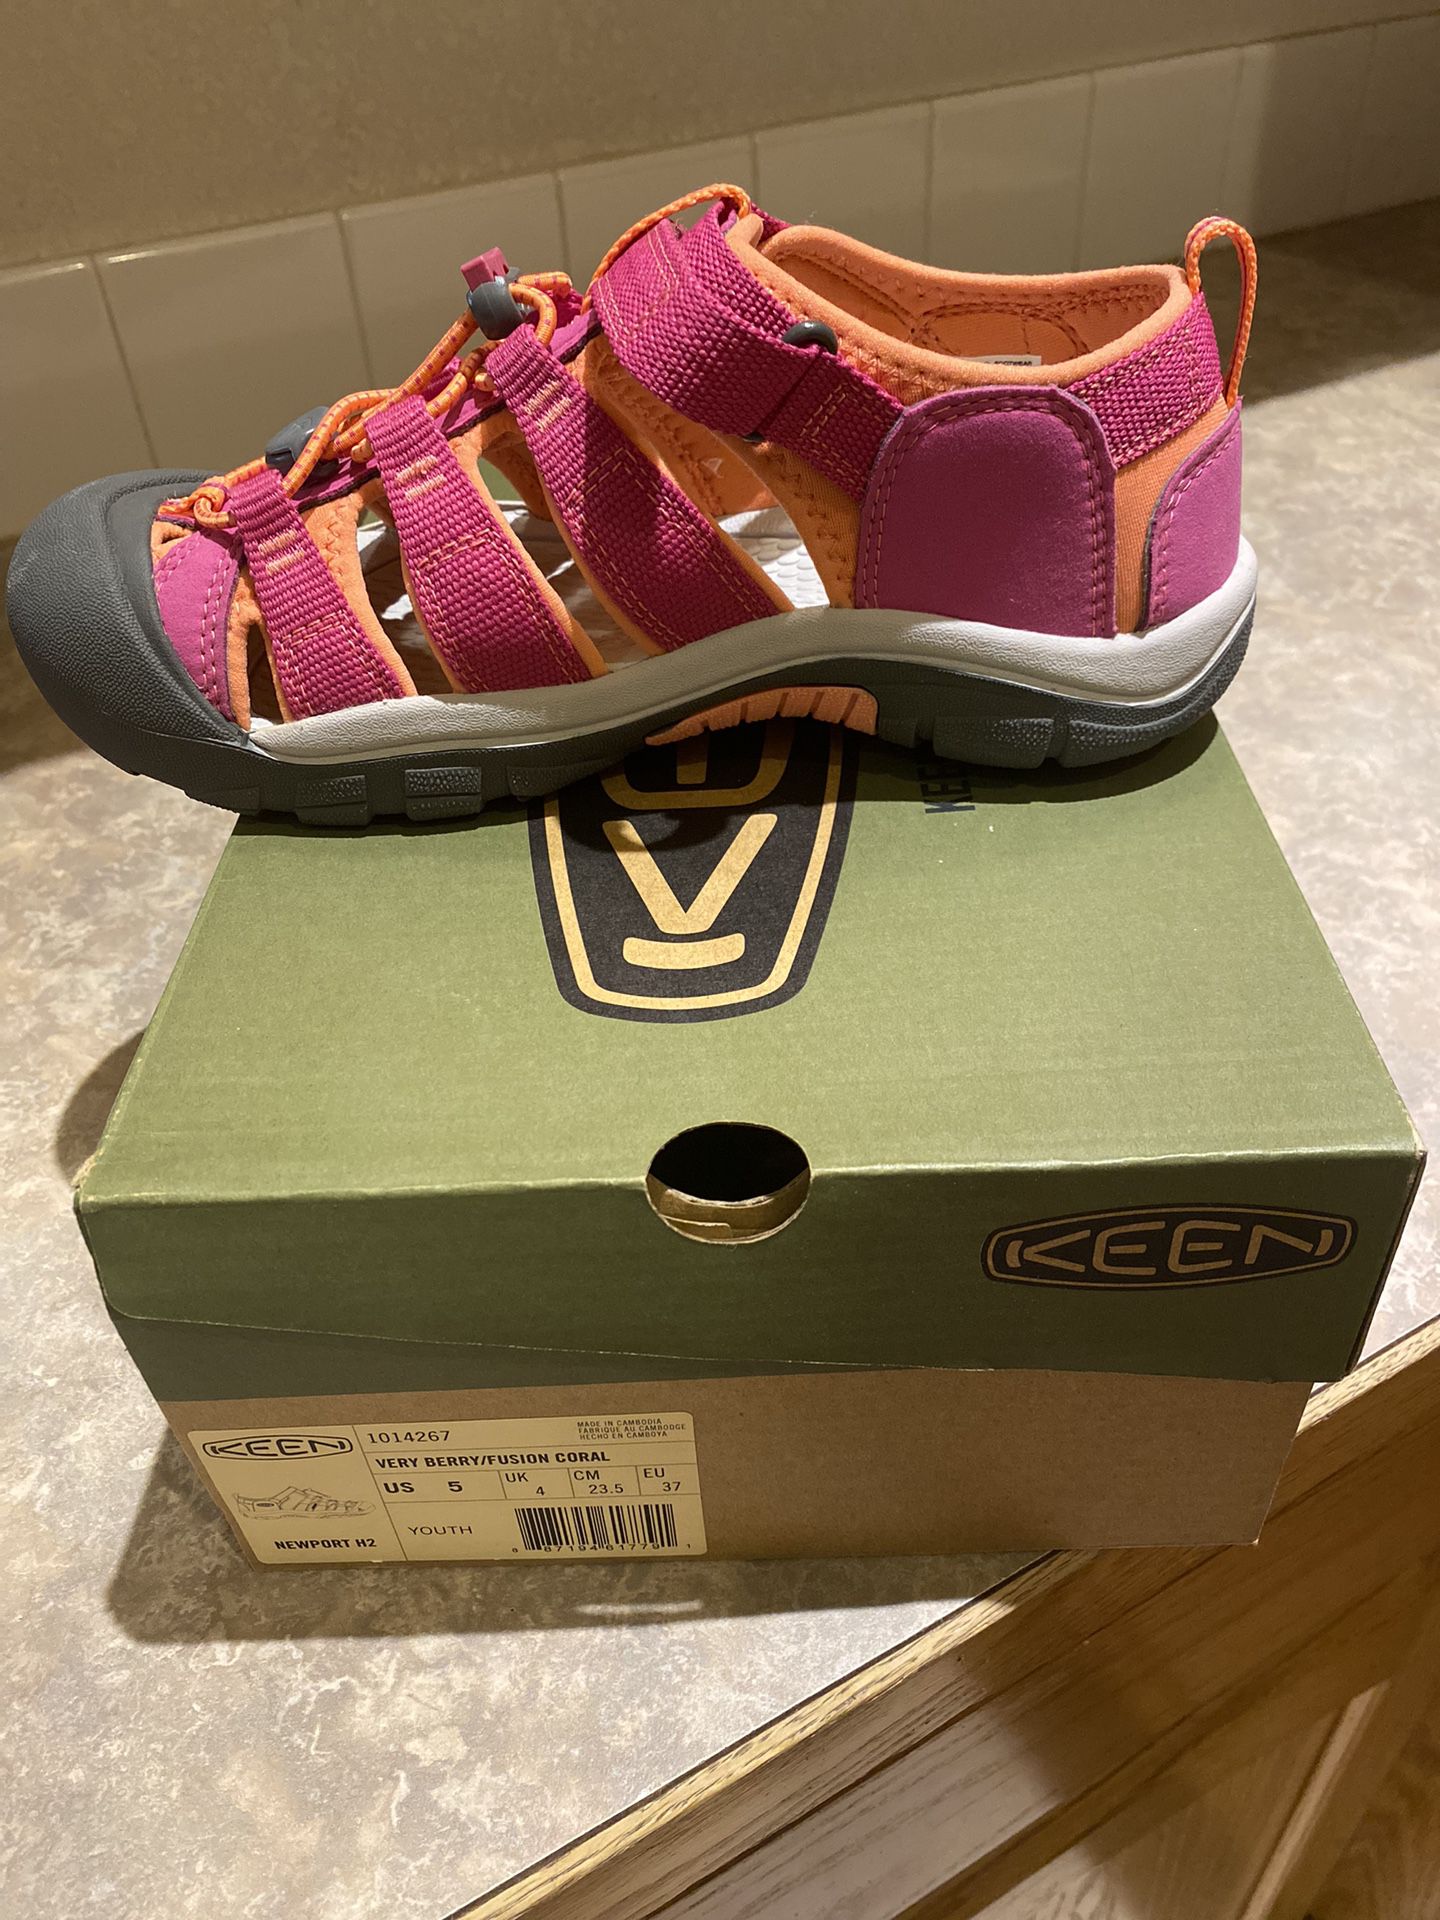 Youth Keen Footwear - Size 5- Very Berry/fushion Coral